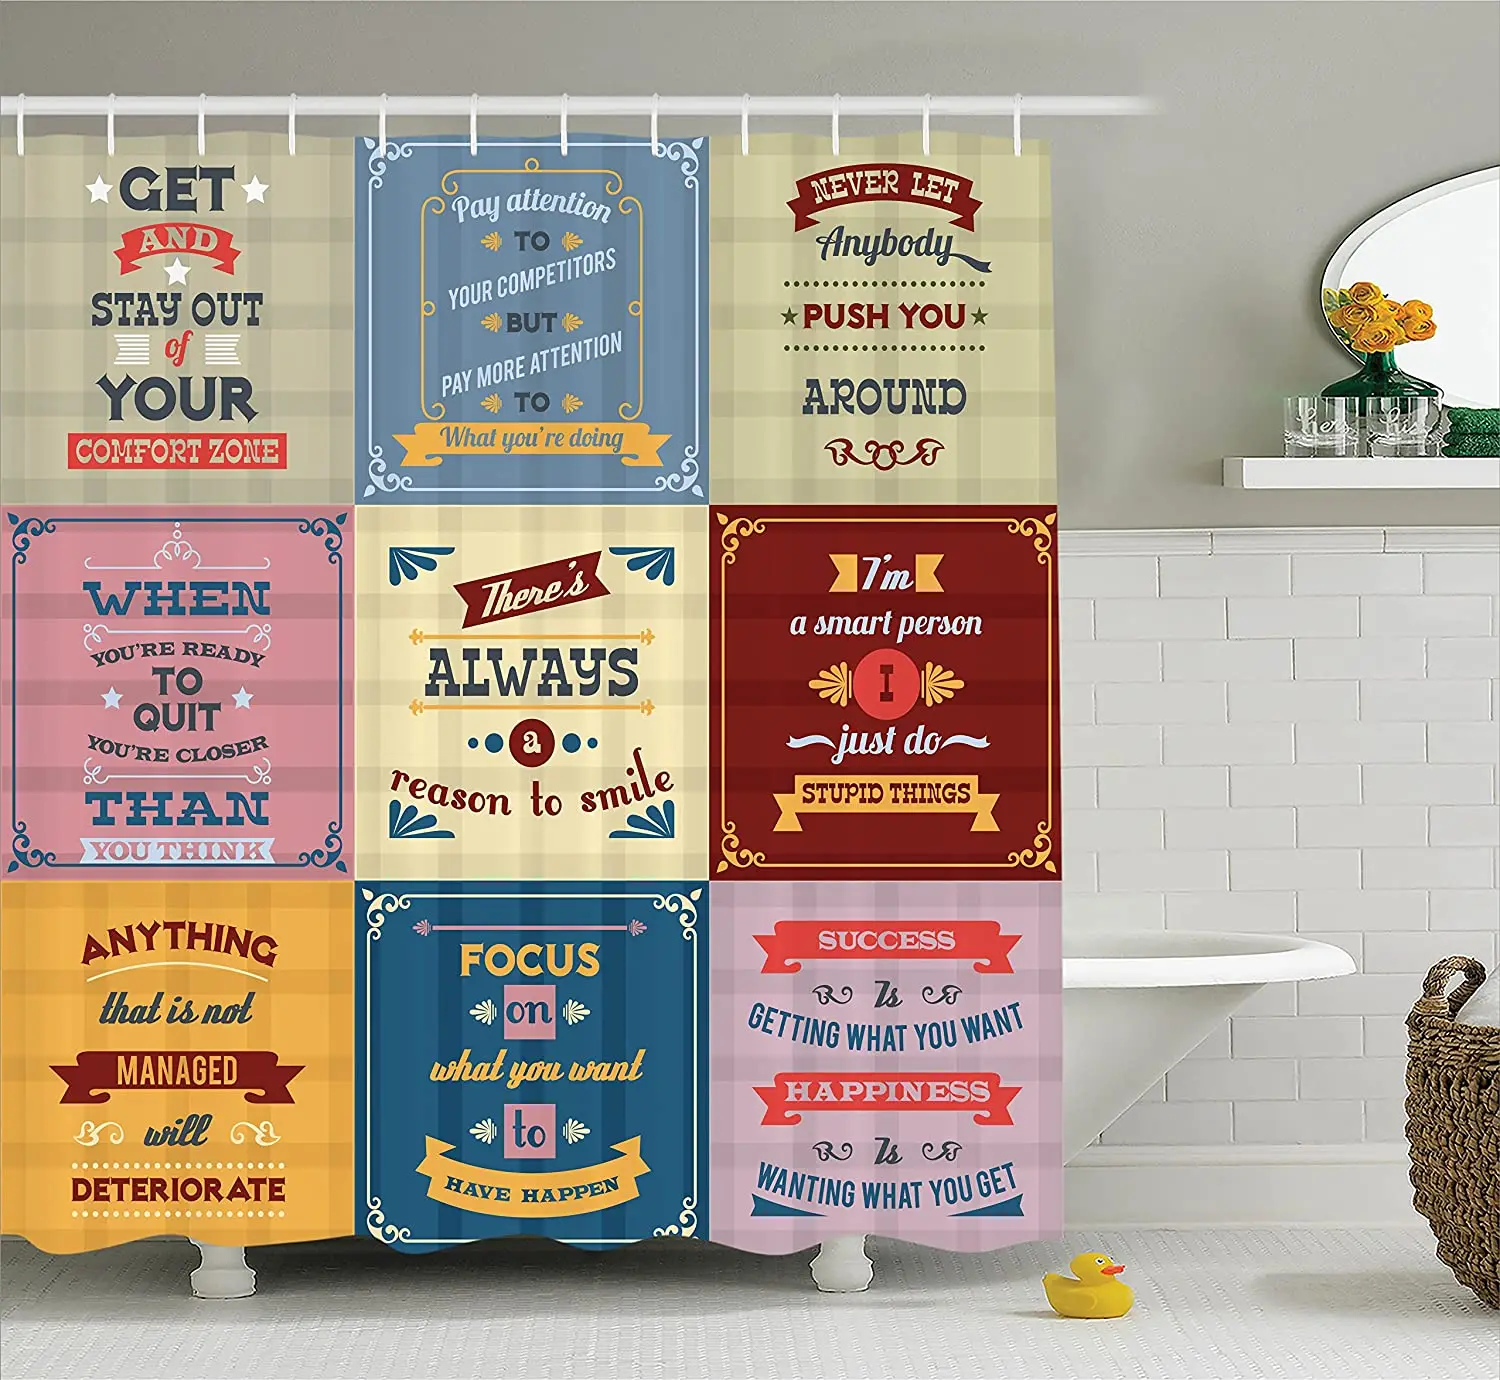 

Quote Shower Curtain Motivational Quotes Success with Positive Attitude Themed Artwork Print Bath Curtains for Bathroom Decor